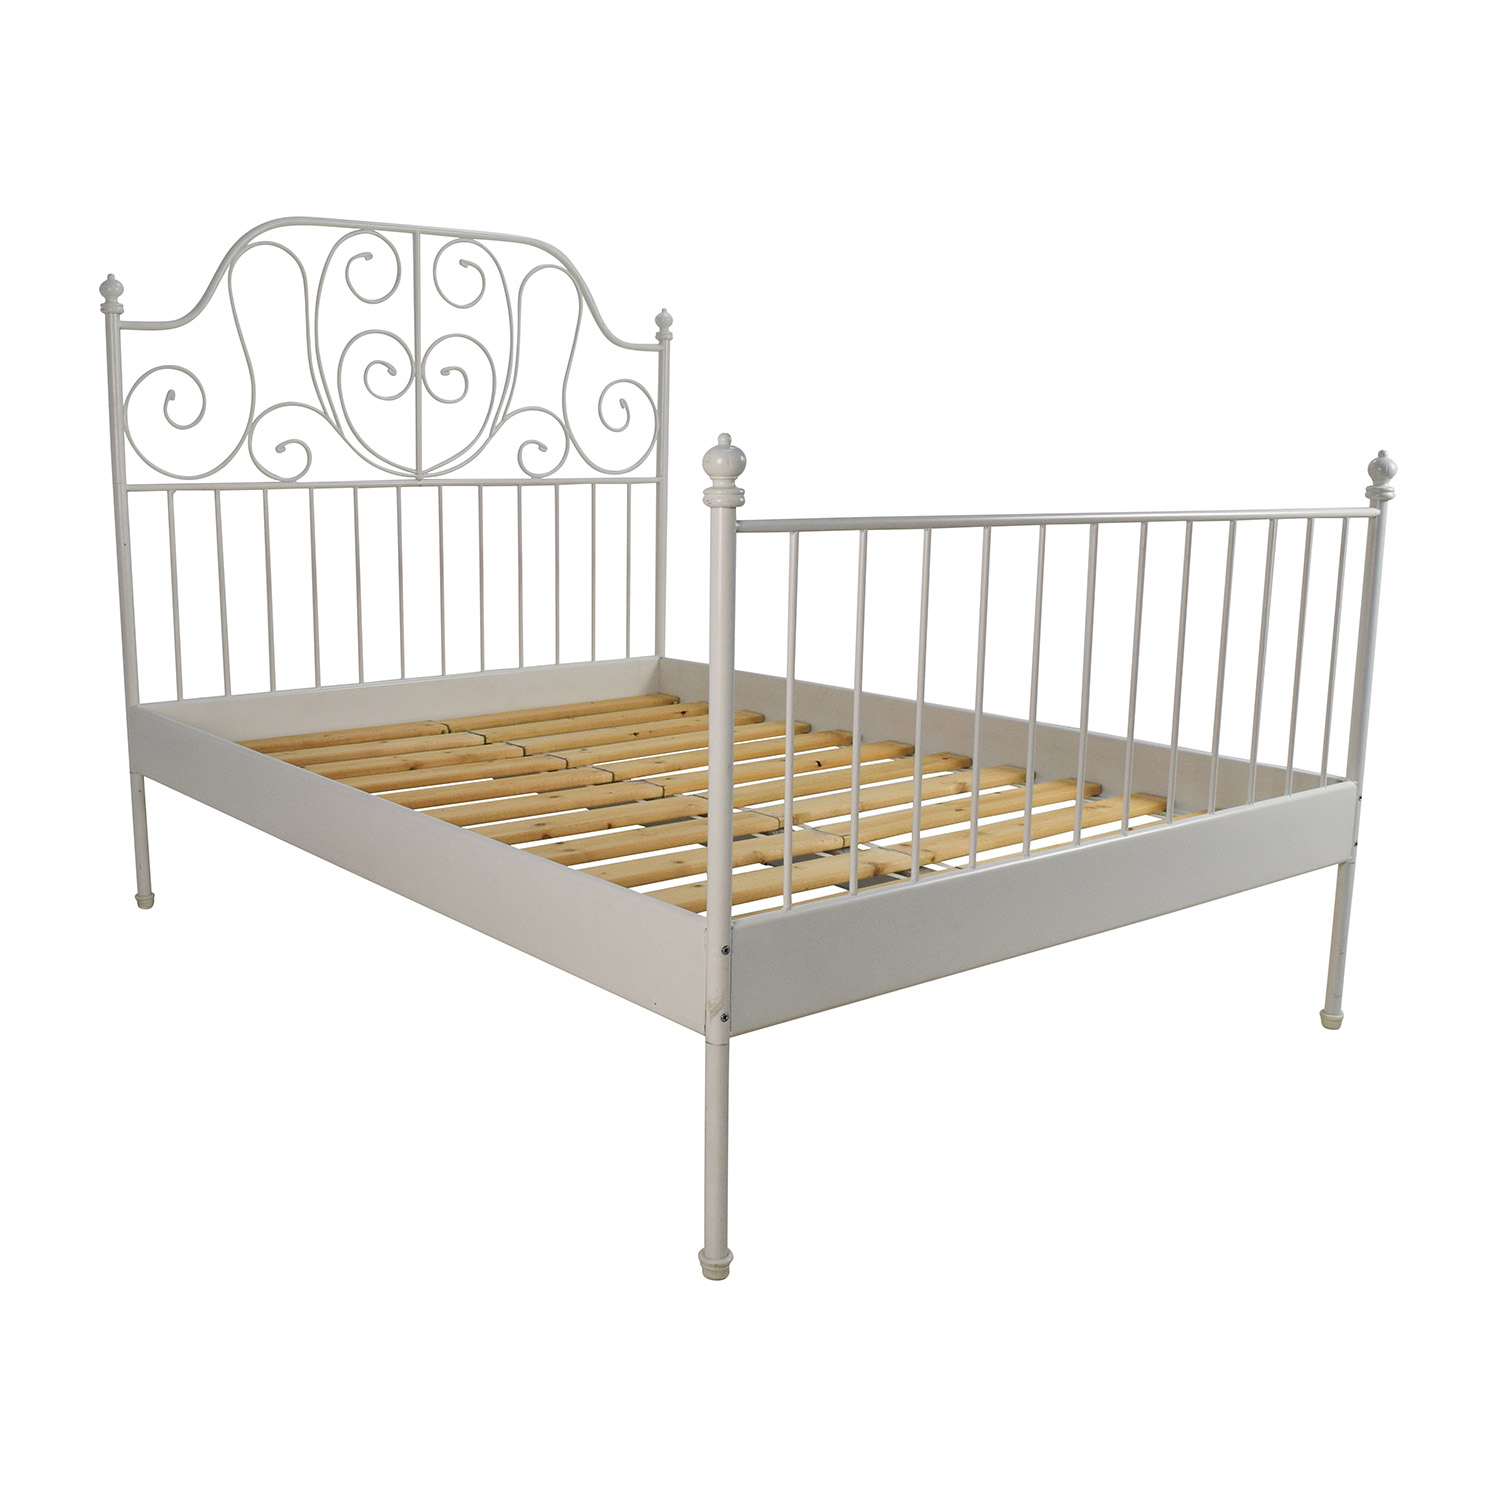 leirvik bed frames ... this bed frame might be just right for you. in KDXYAFS